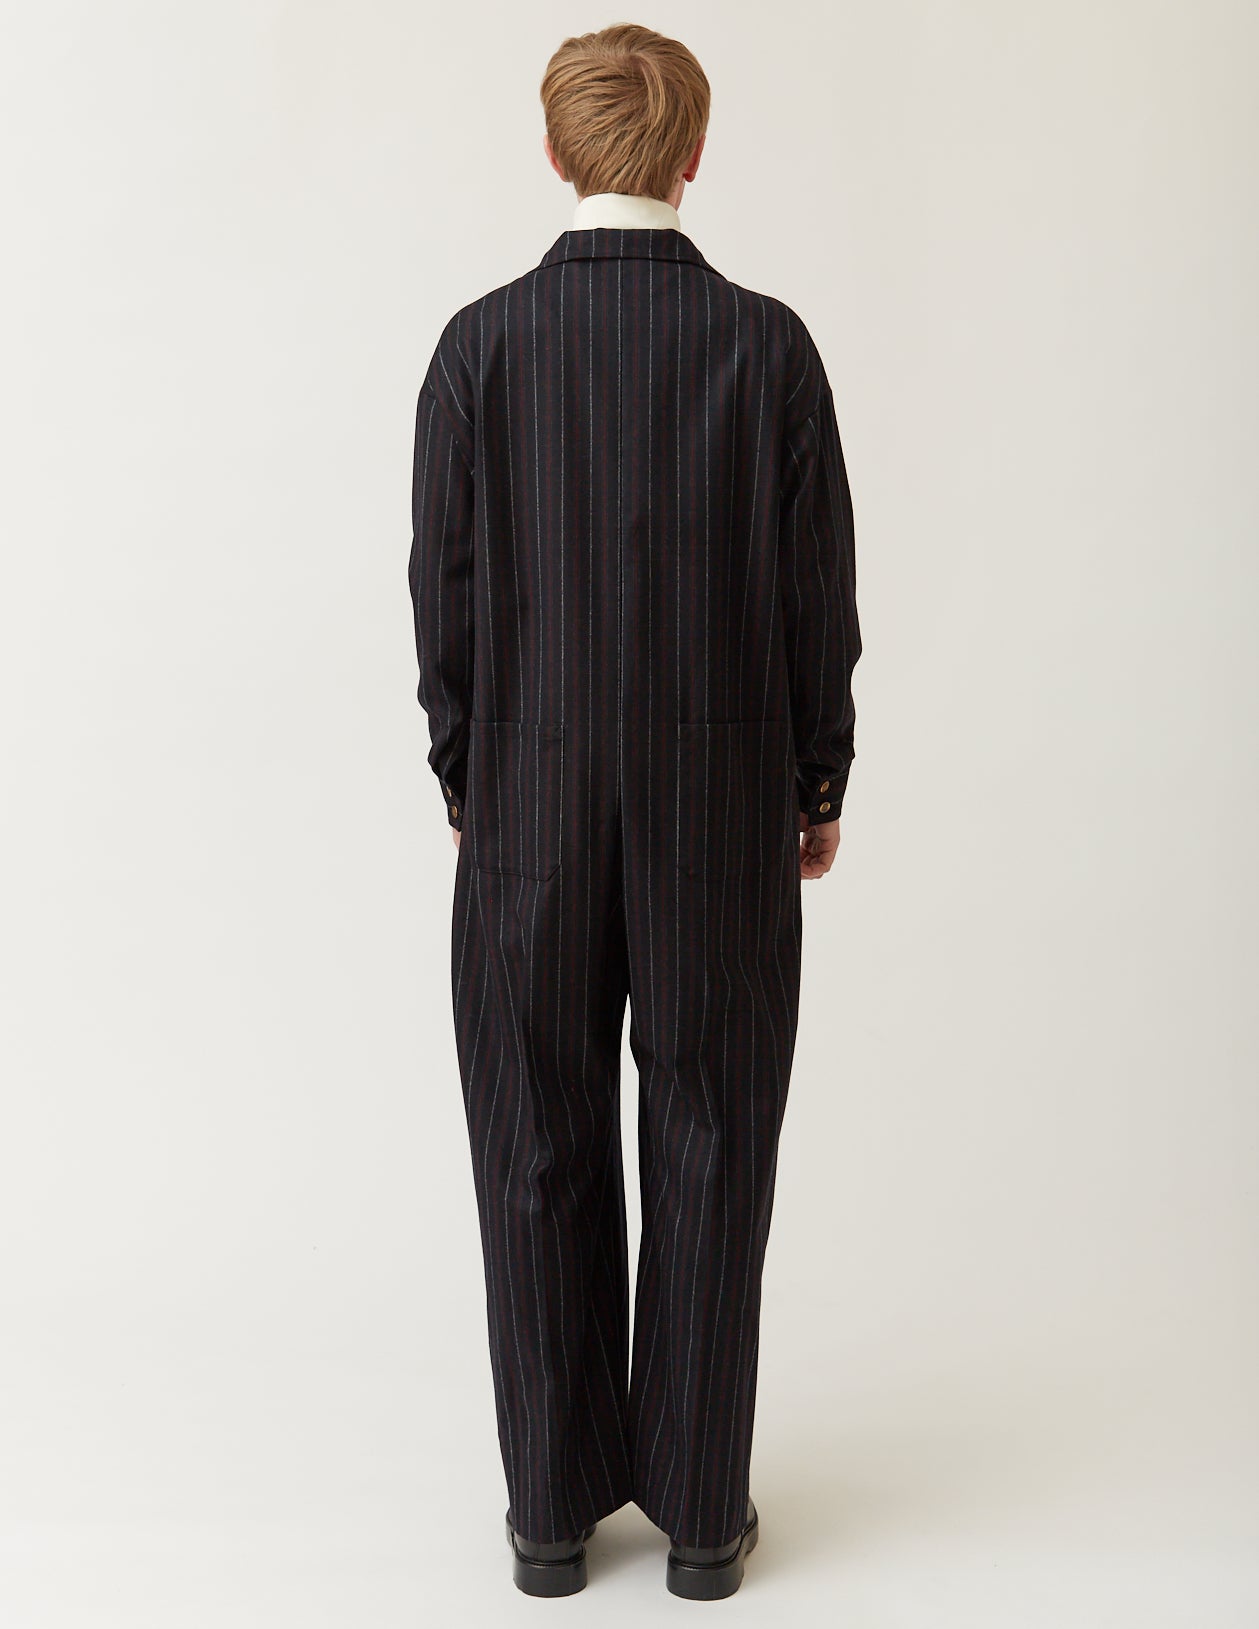 Collared & Cuffed Jumpsuit navy x white & red pinstripe